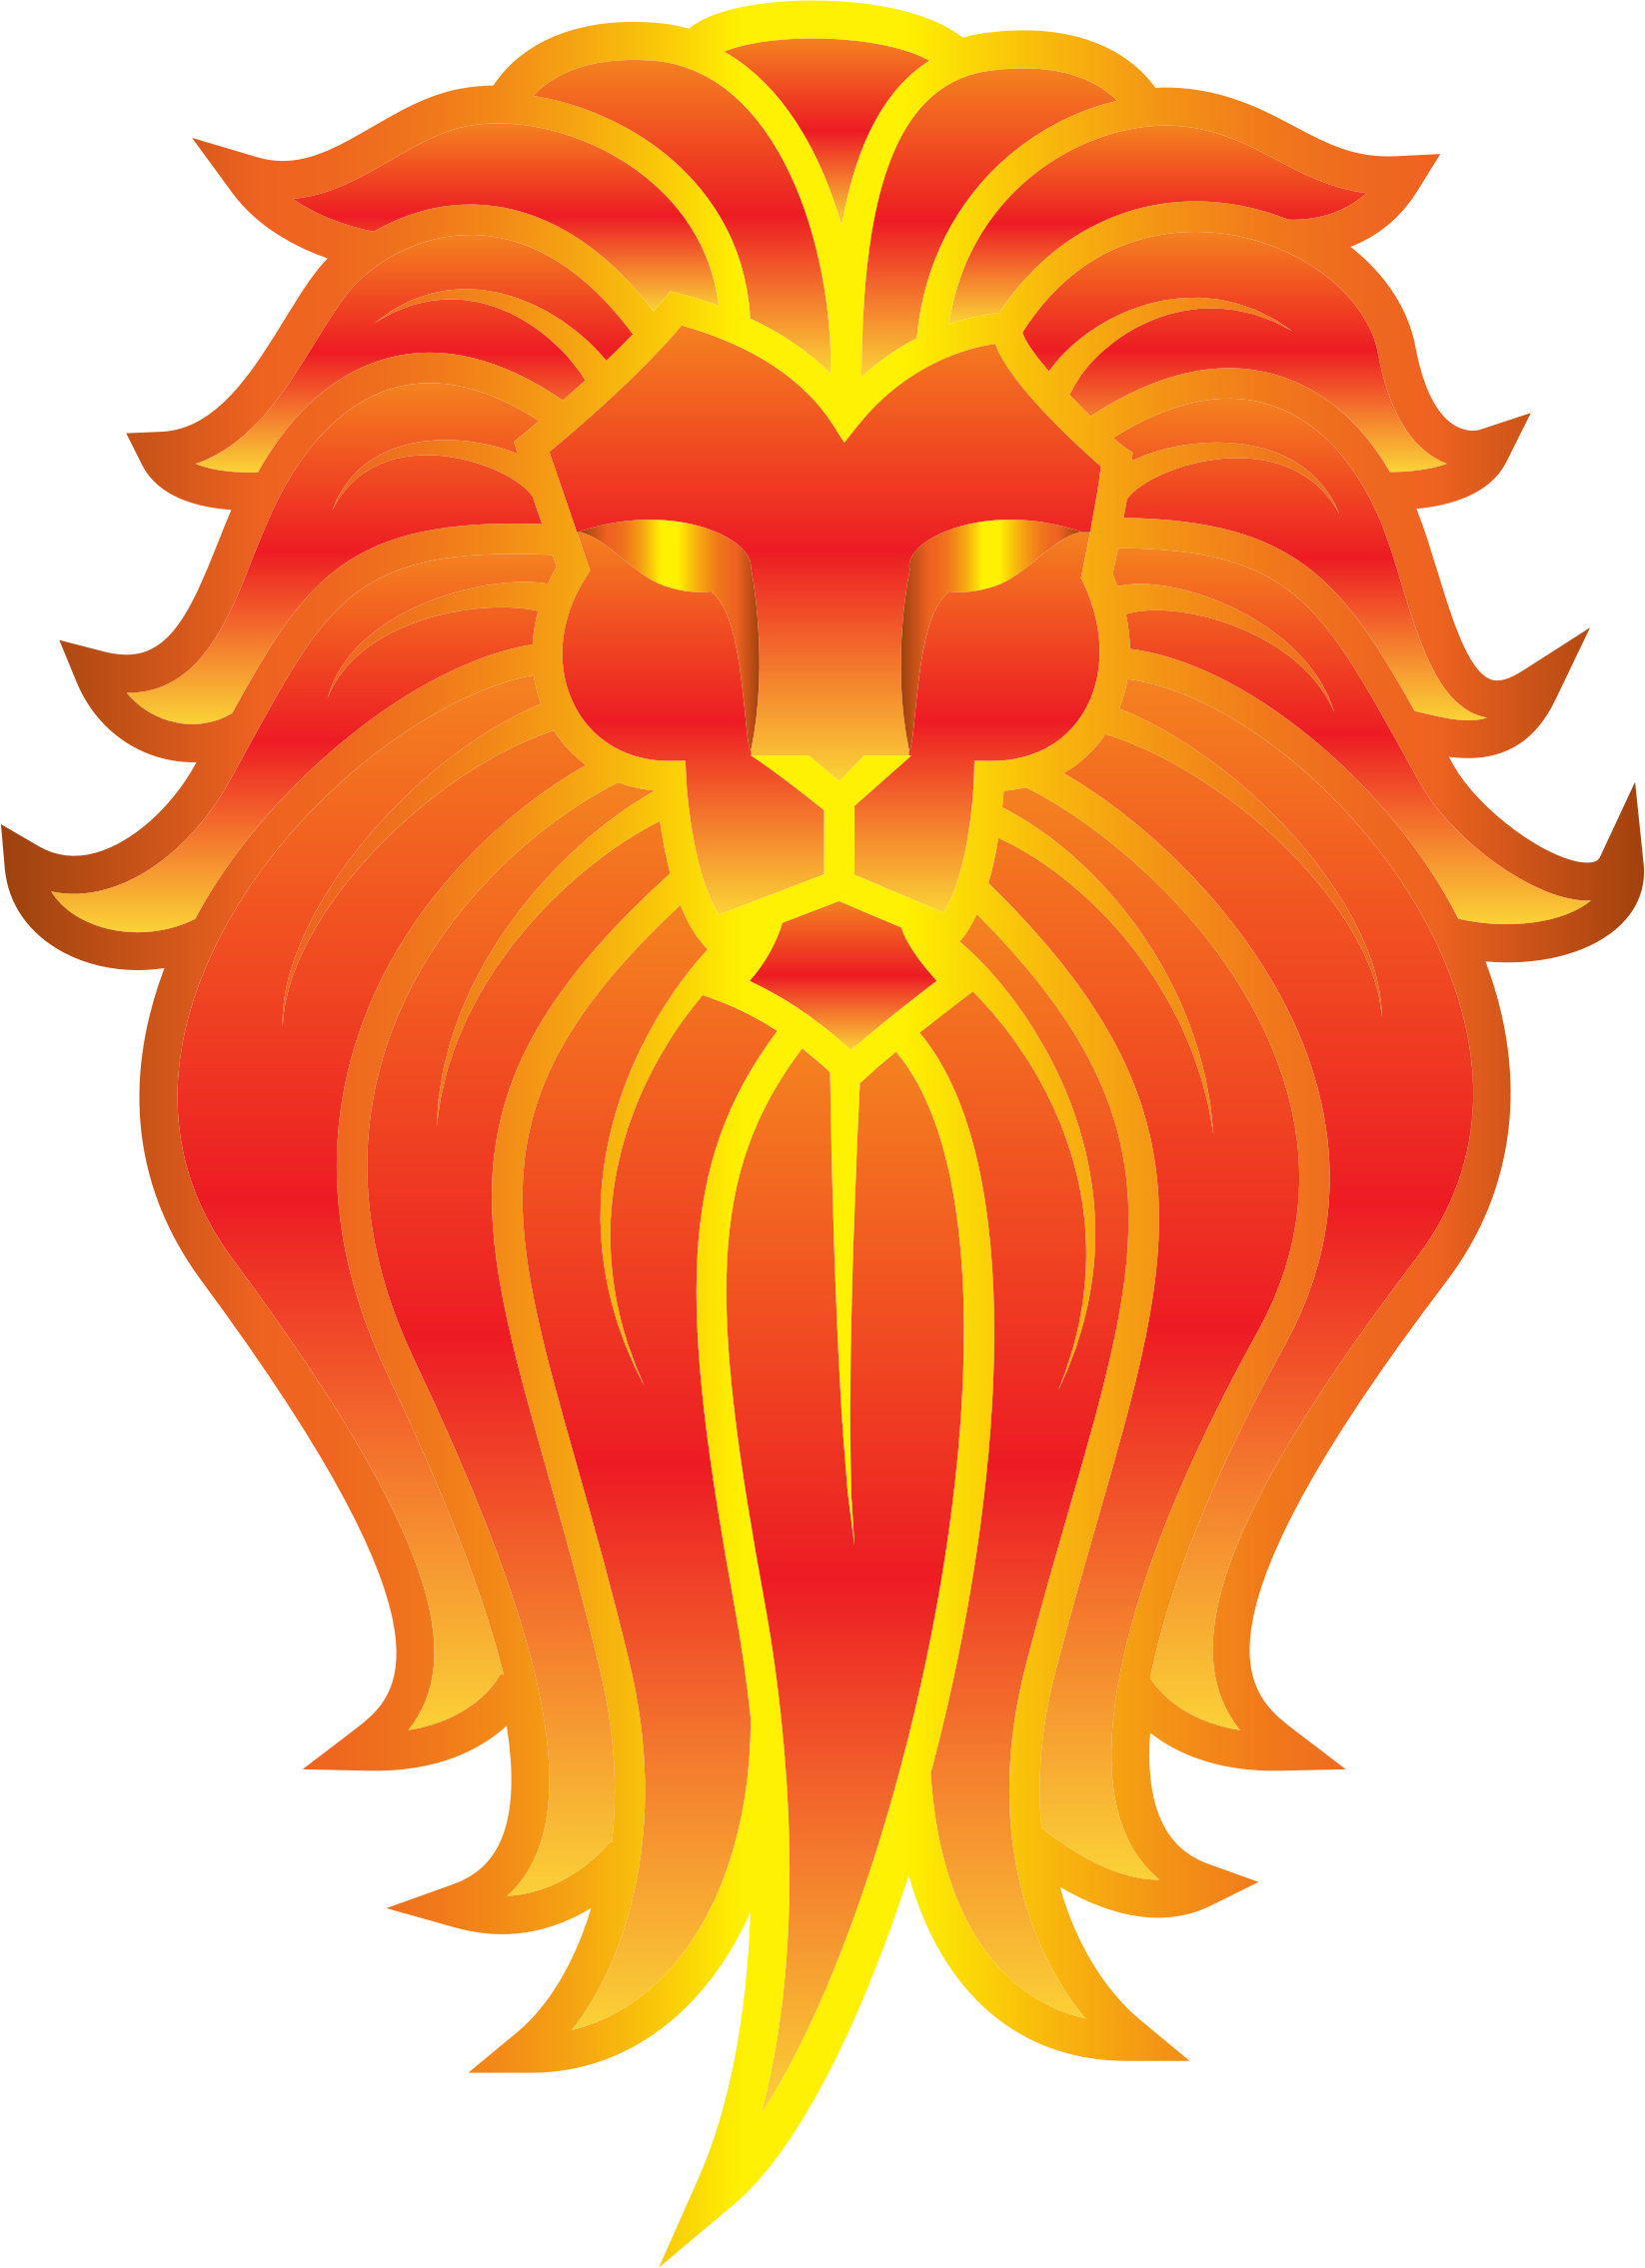 Big Image - Lion Face With No Background (1646x2270)